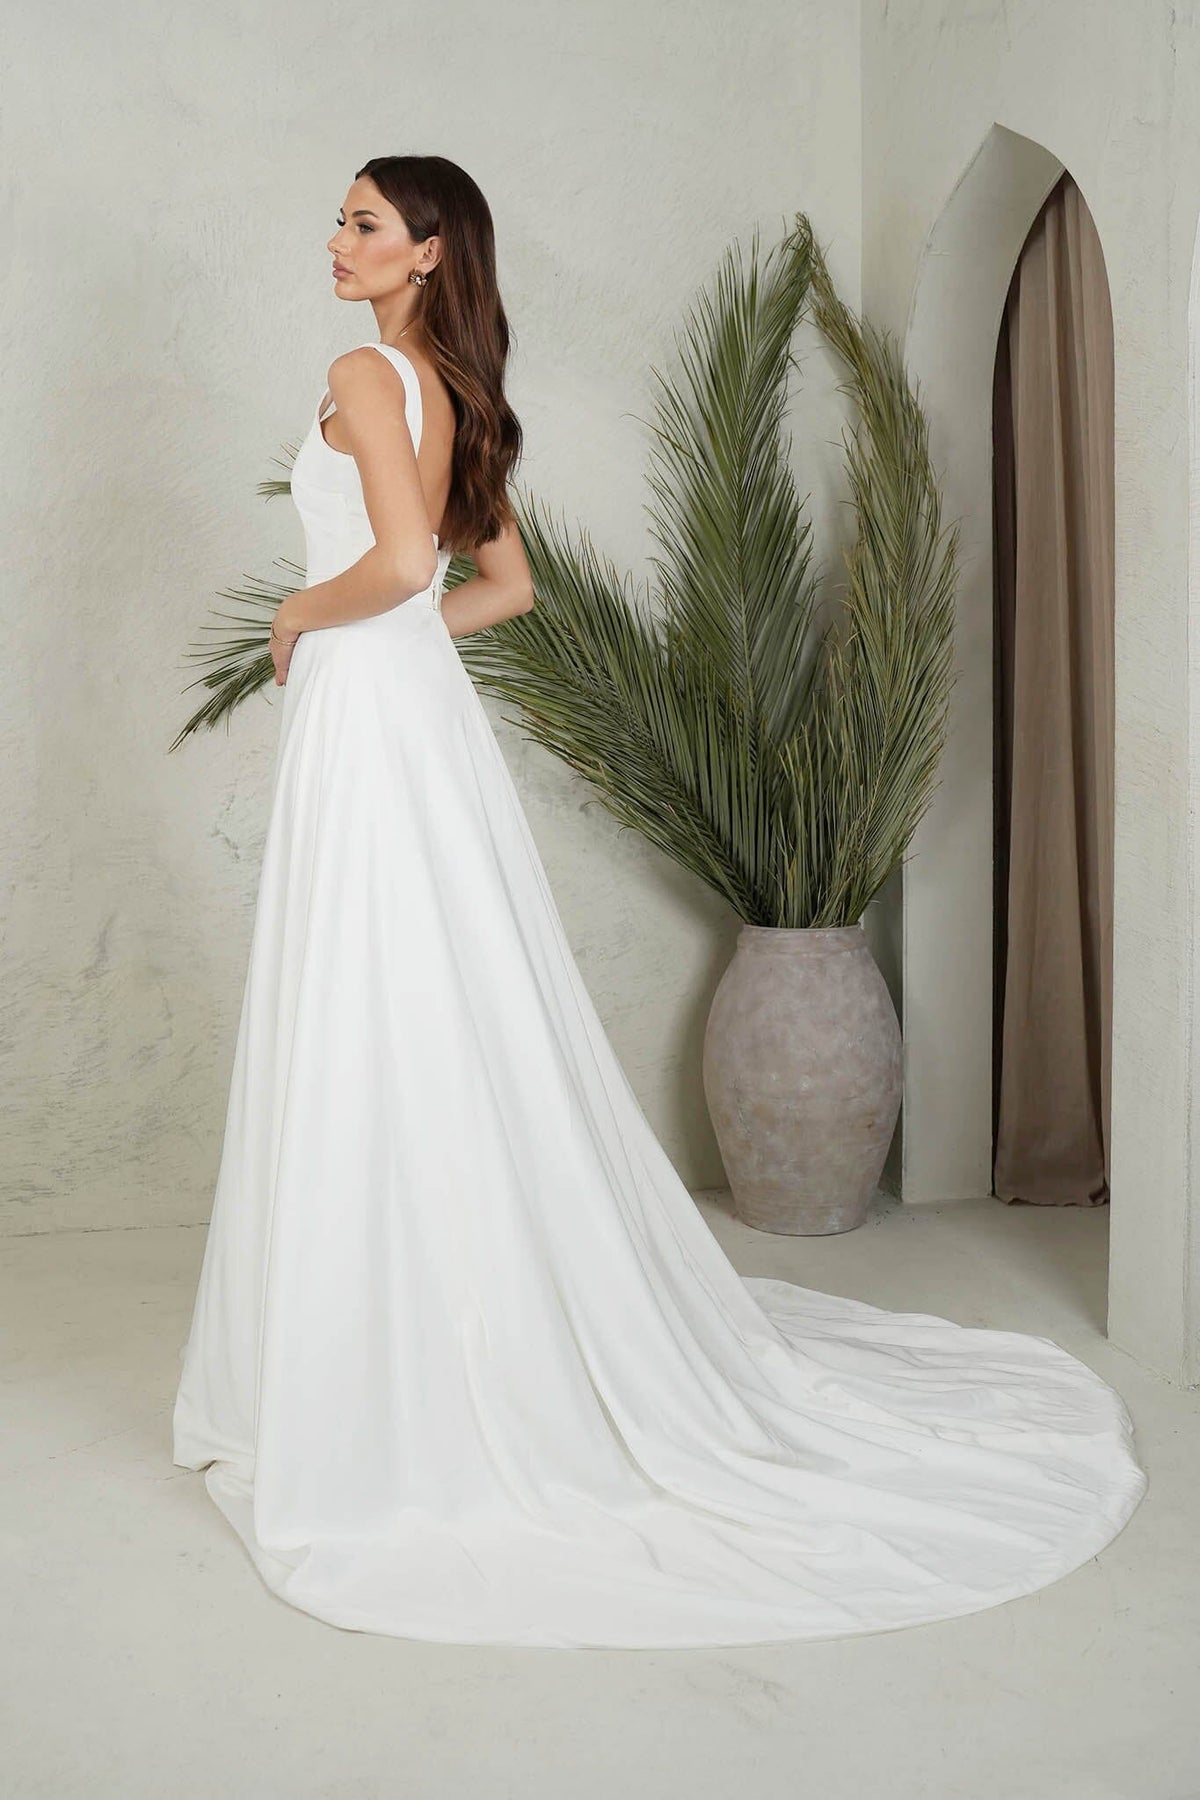 Side Image showcasing Dramatic Train of Ivory White A-line Ball Gown with Square Neckline, Shoulder Straps and Detachable Belt